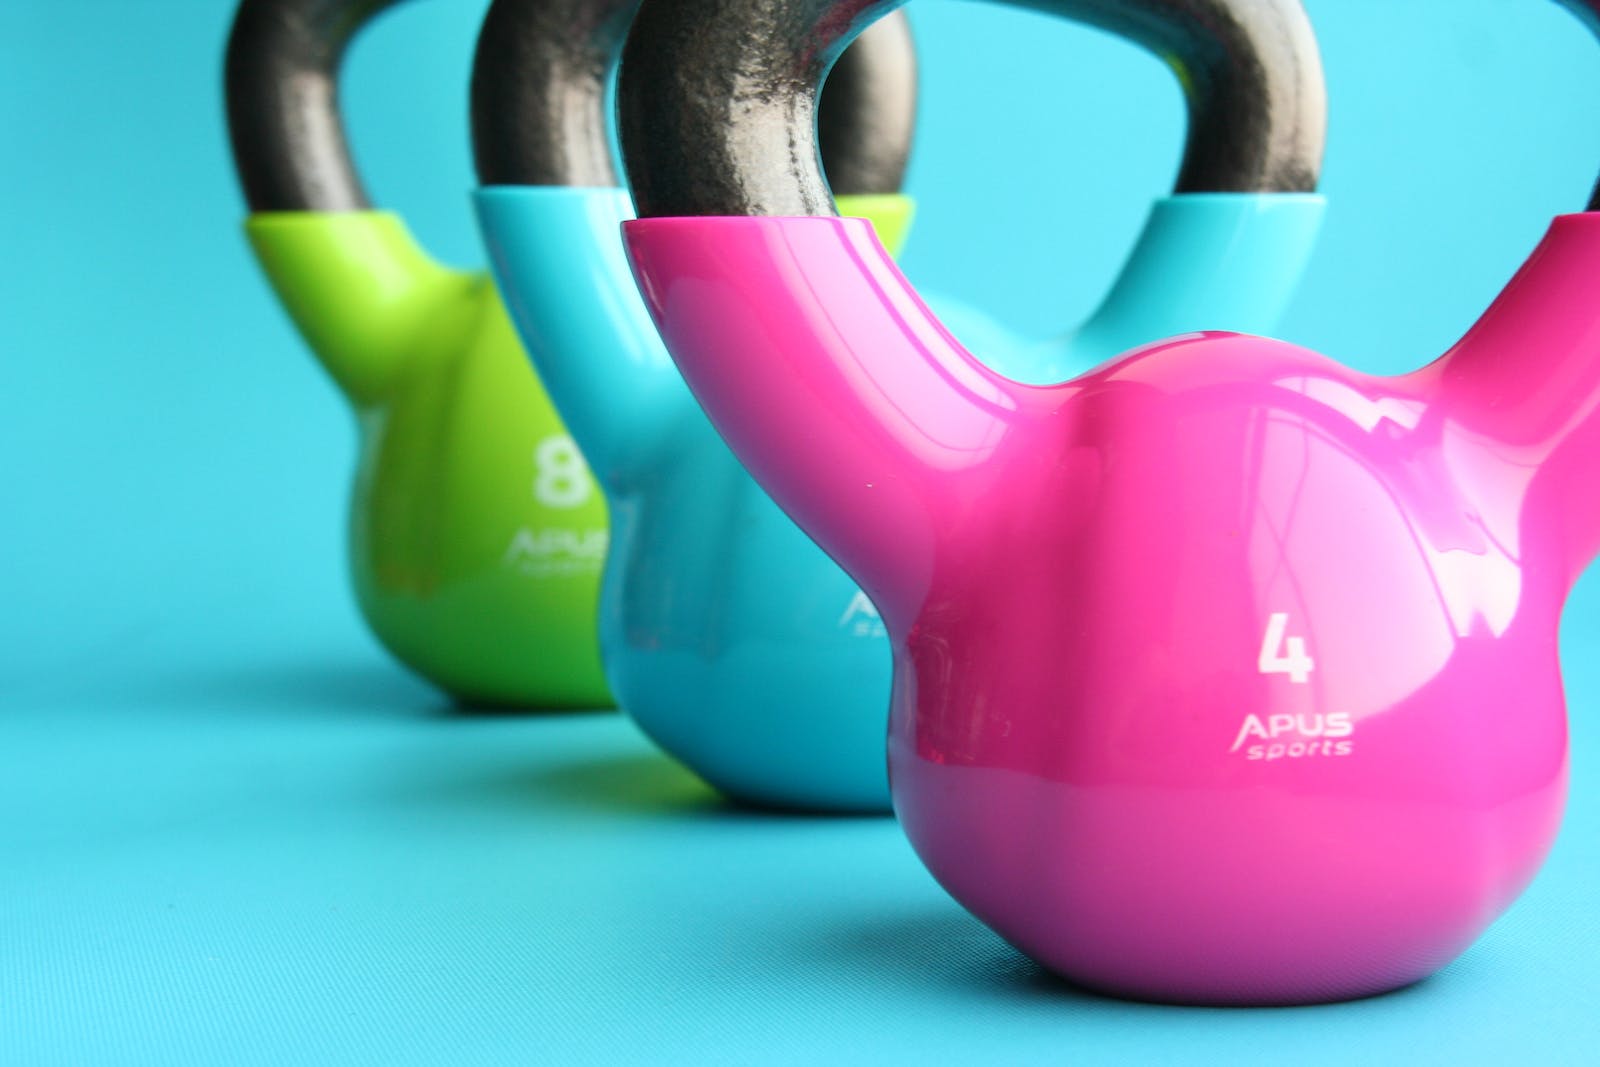 Green, Blue, and Pink Kettle Bells on Blue Surface